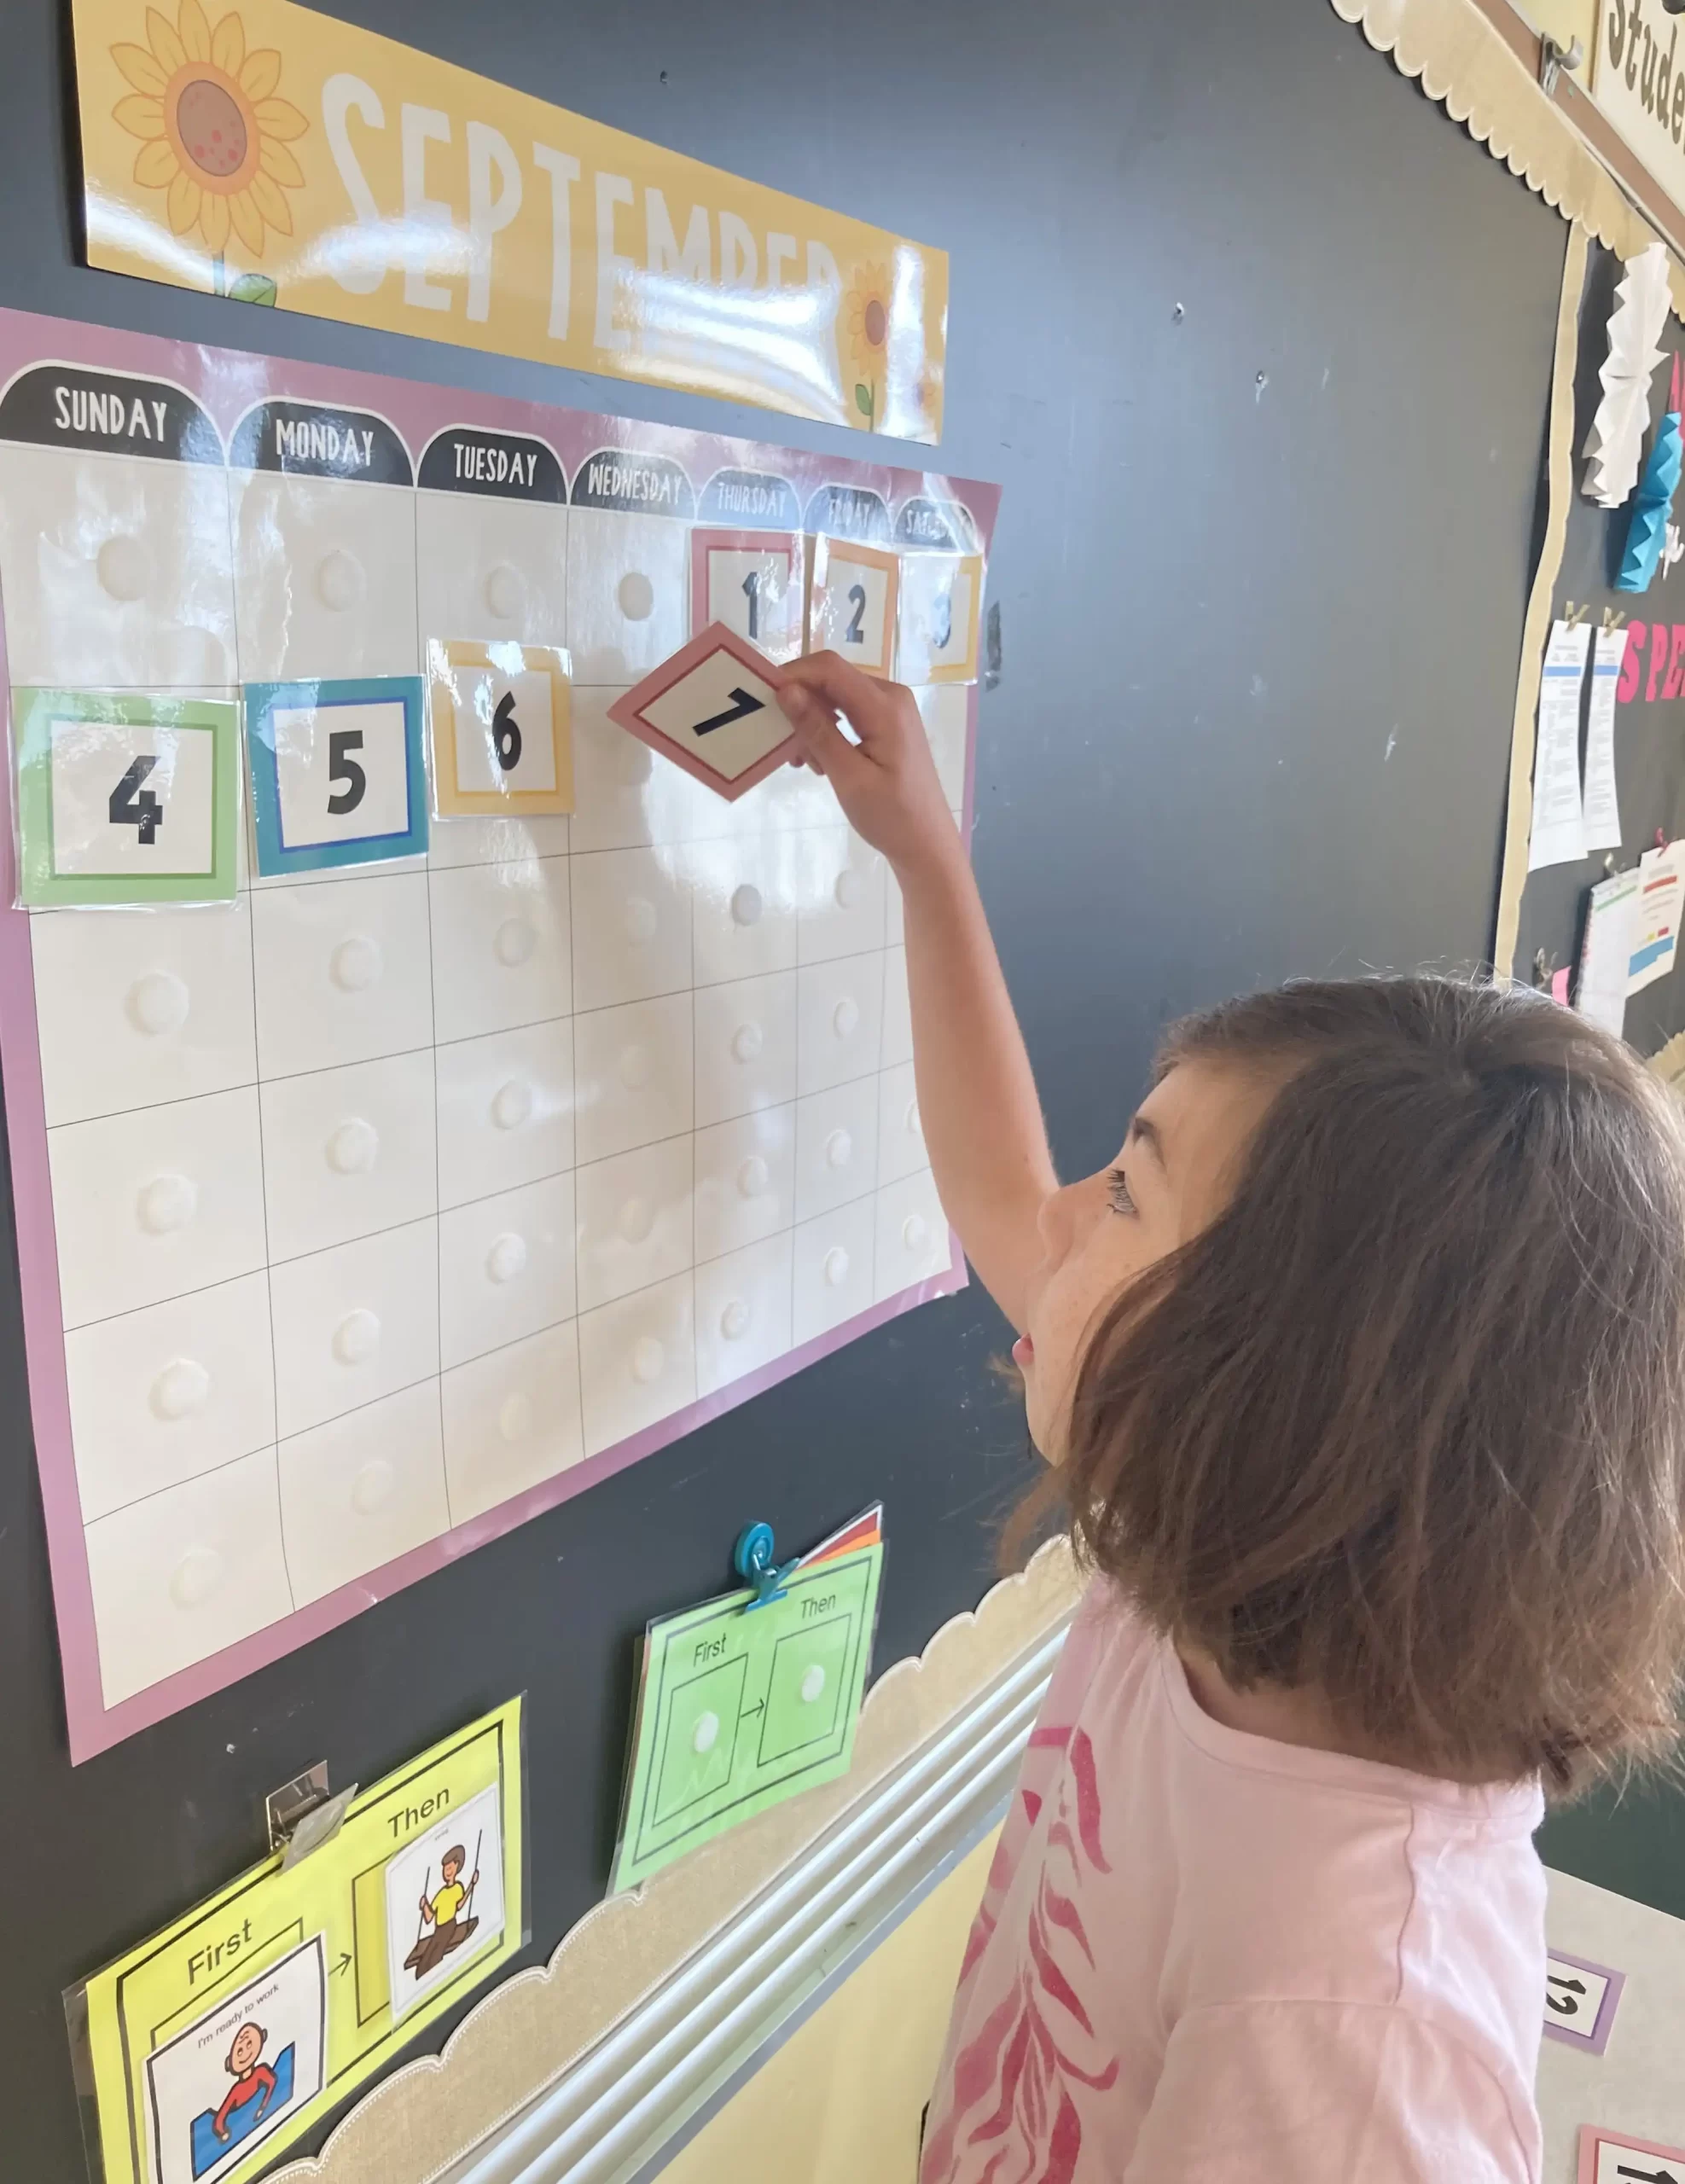 Girl wearing pink shirt placing numbers on a calendar hanging on a blackboard.